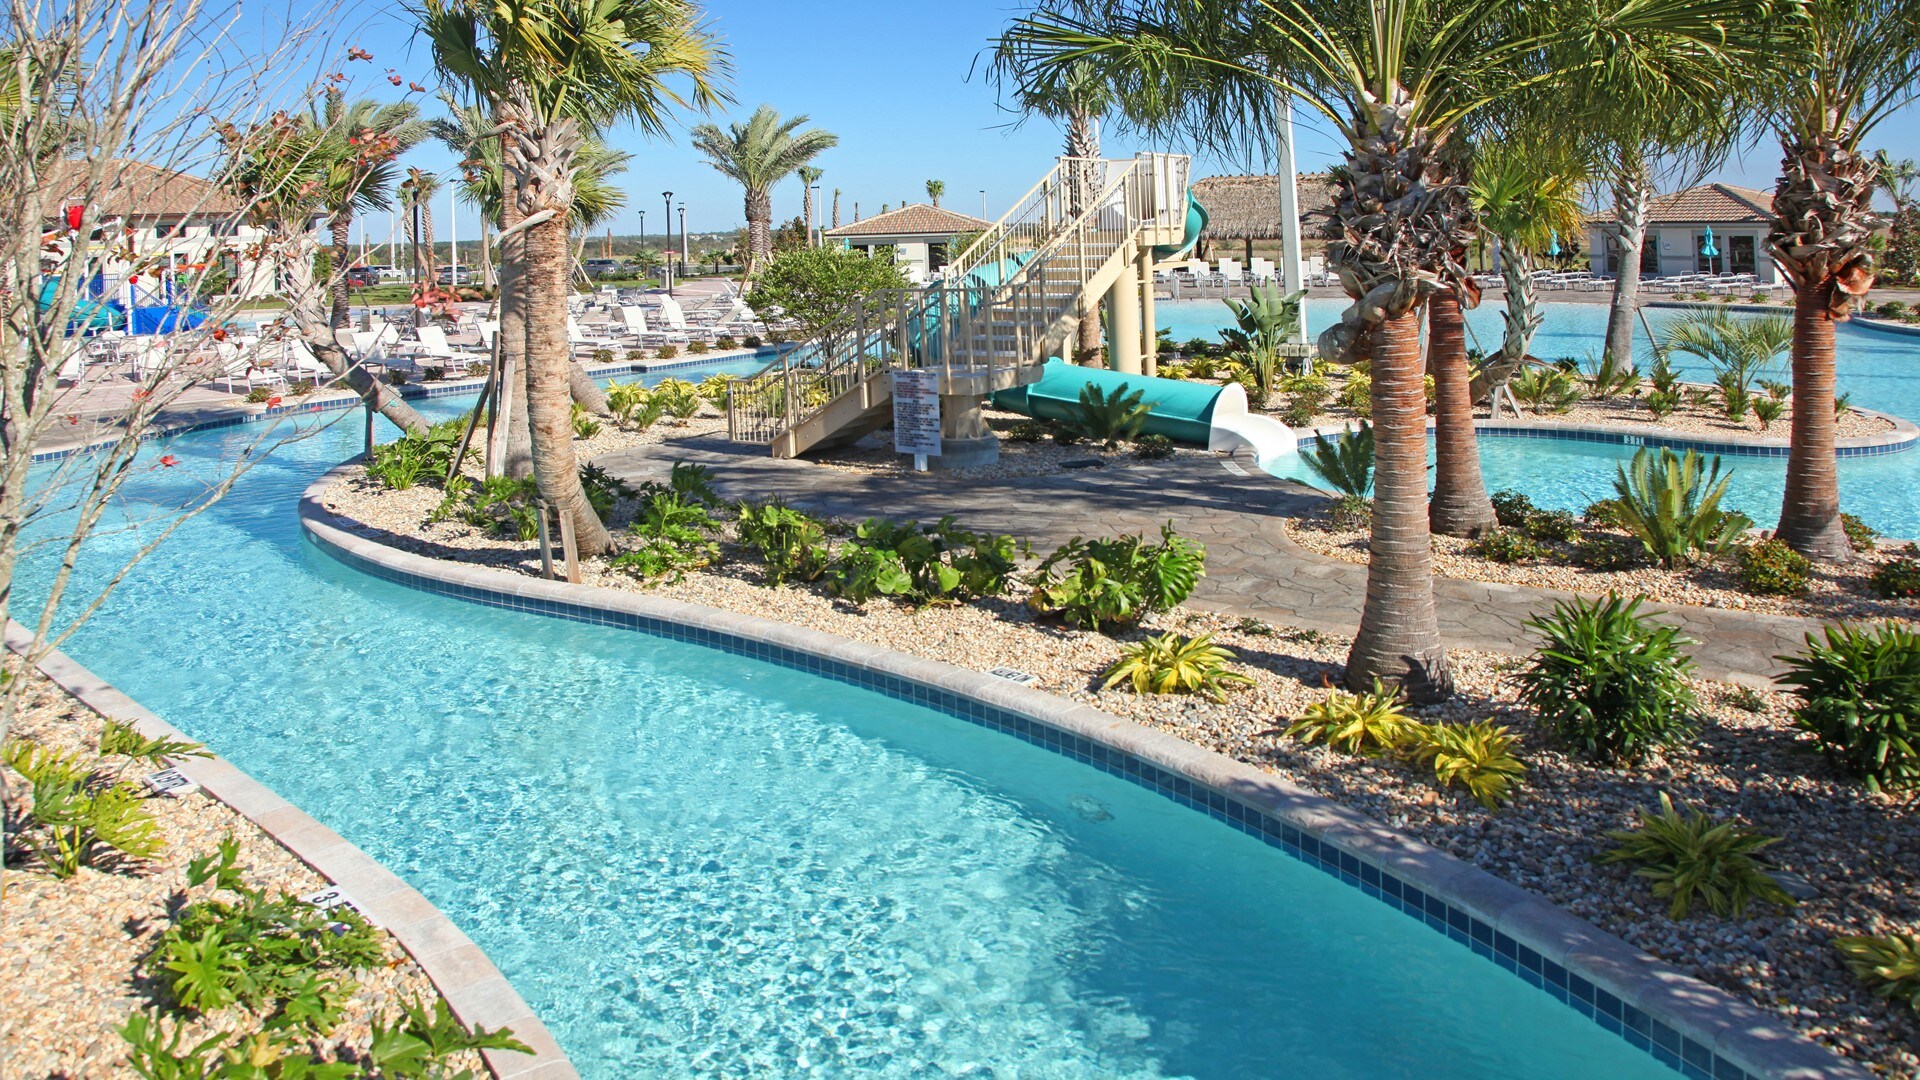 Resort Amenities - Lazy River, a winding aquatic haven for a leisurely and relaxing experience